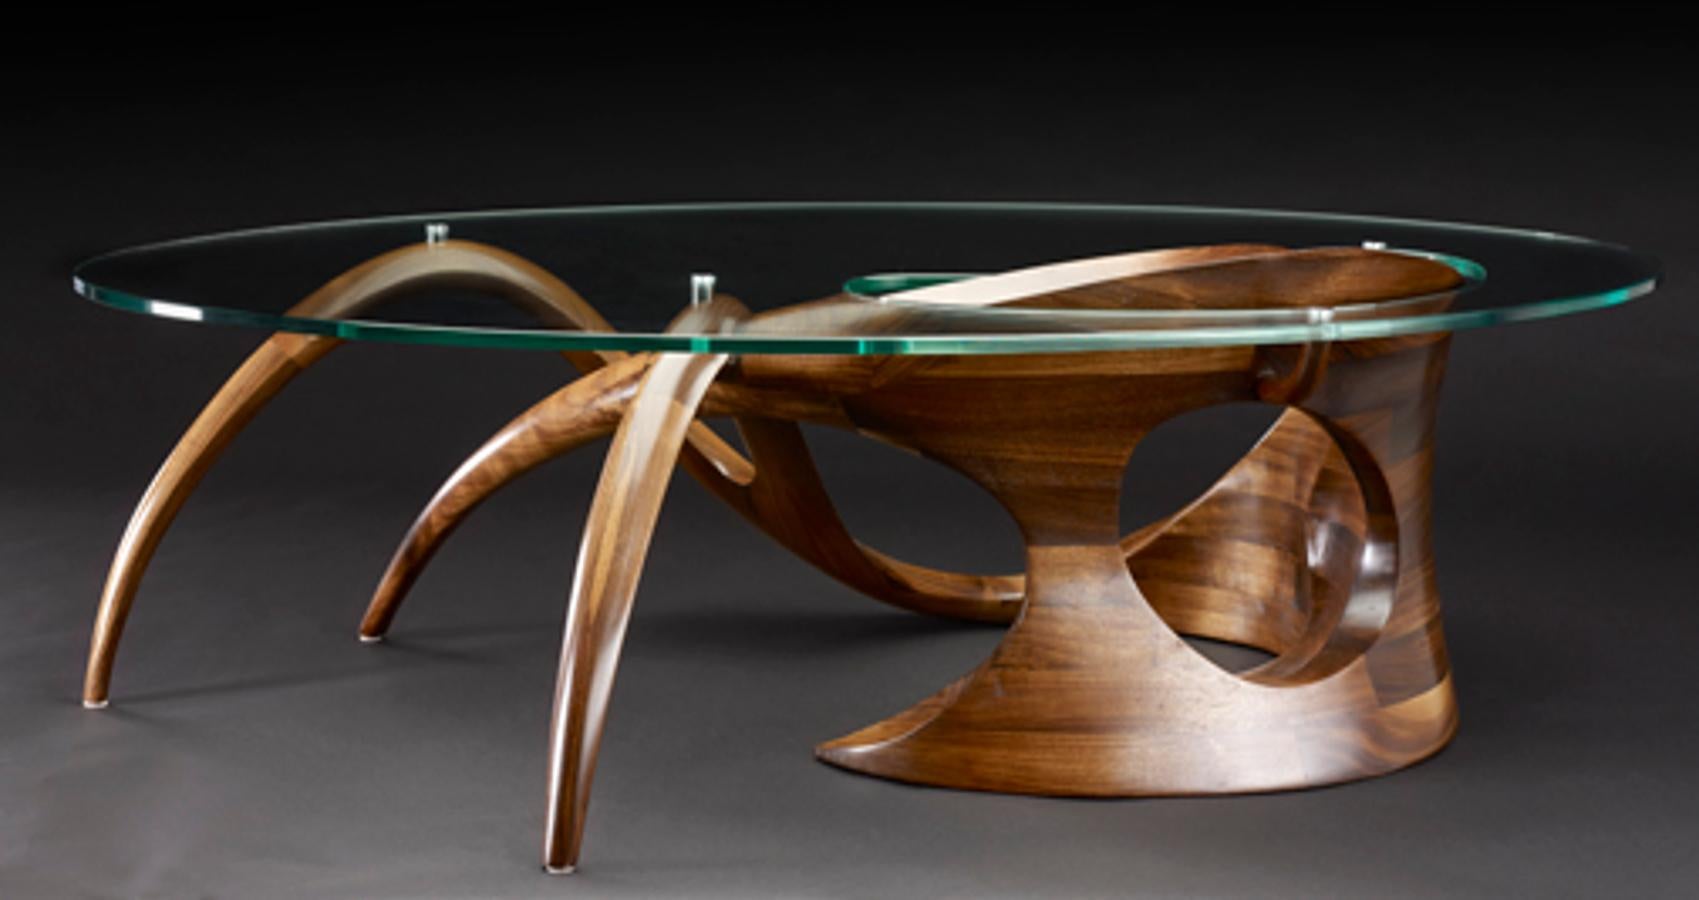 Sculpted black walnut coffee table signed by Gildas Berthelot
Title: La Chimère I
Material: Black walnut, glass
Dimensions: 51'' (L) 27'' (W) 14'' (H)
Signed by Gildas Berthelot

Gildas Berthelot has forged for more than 30 years a singular path in